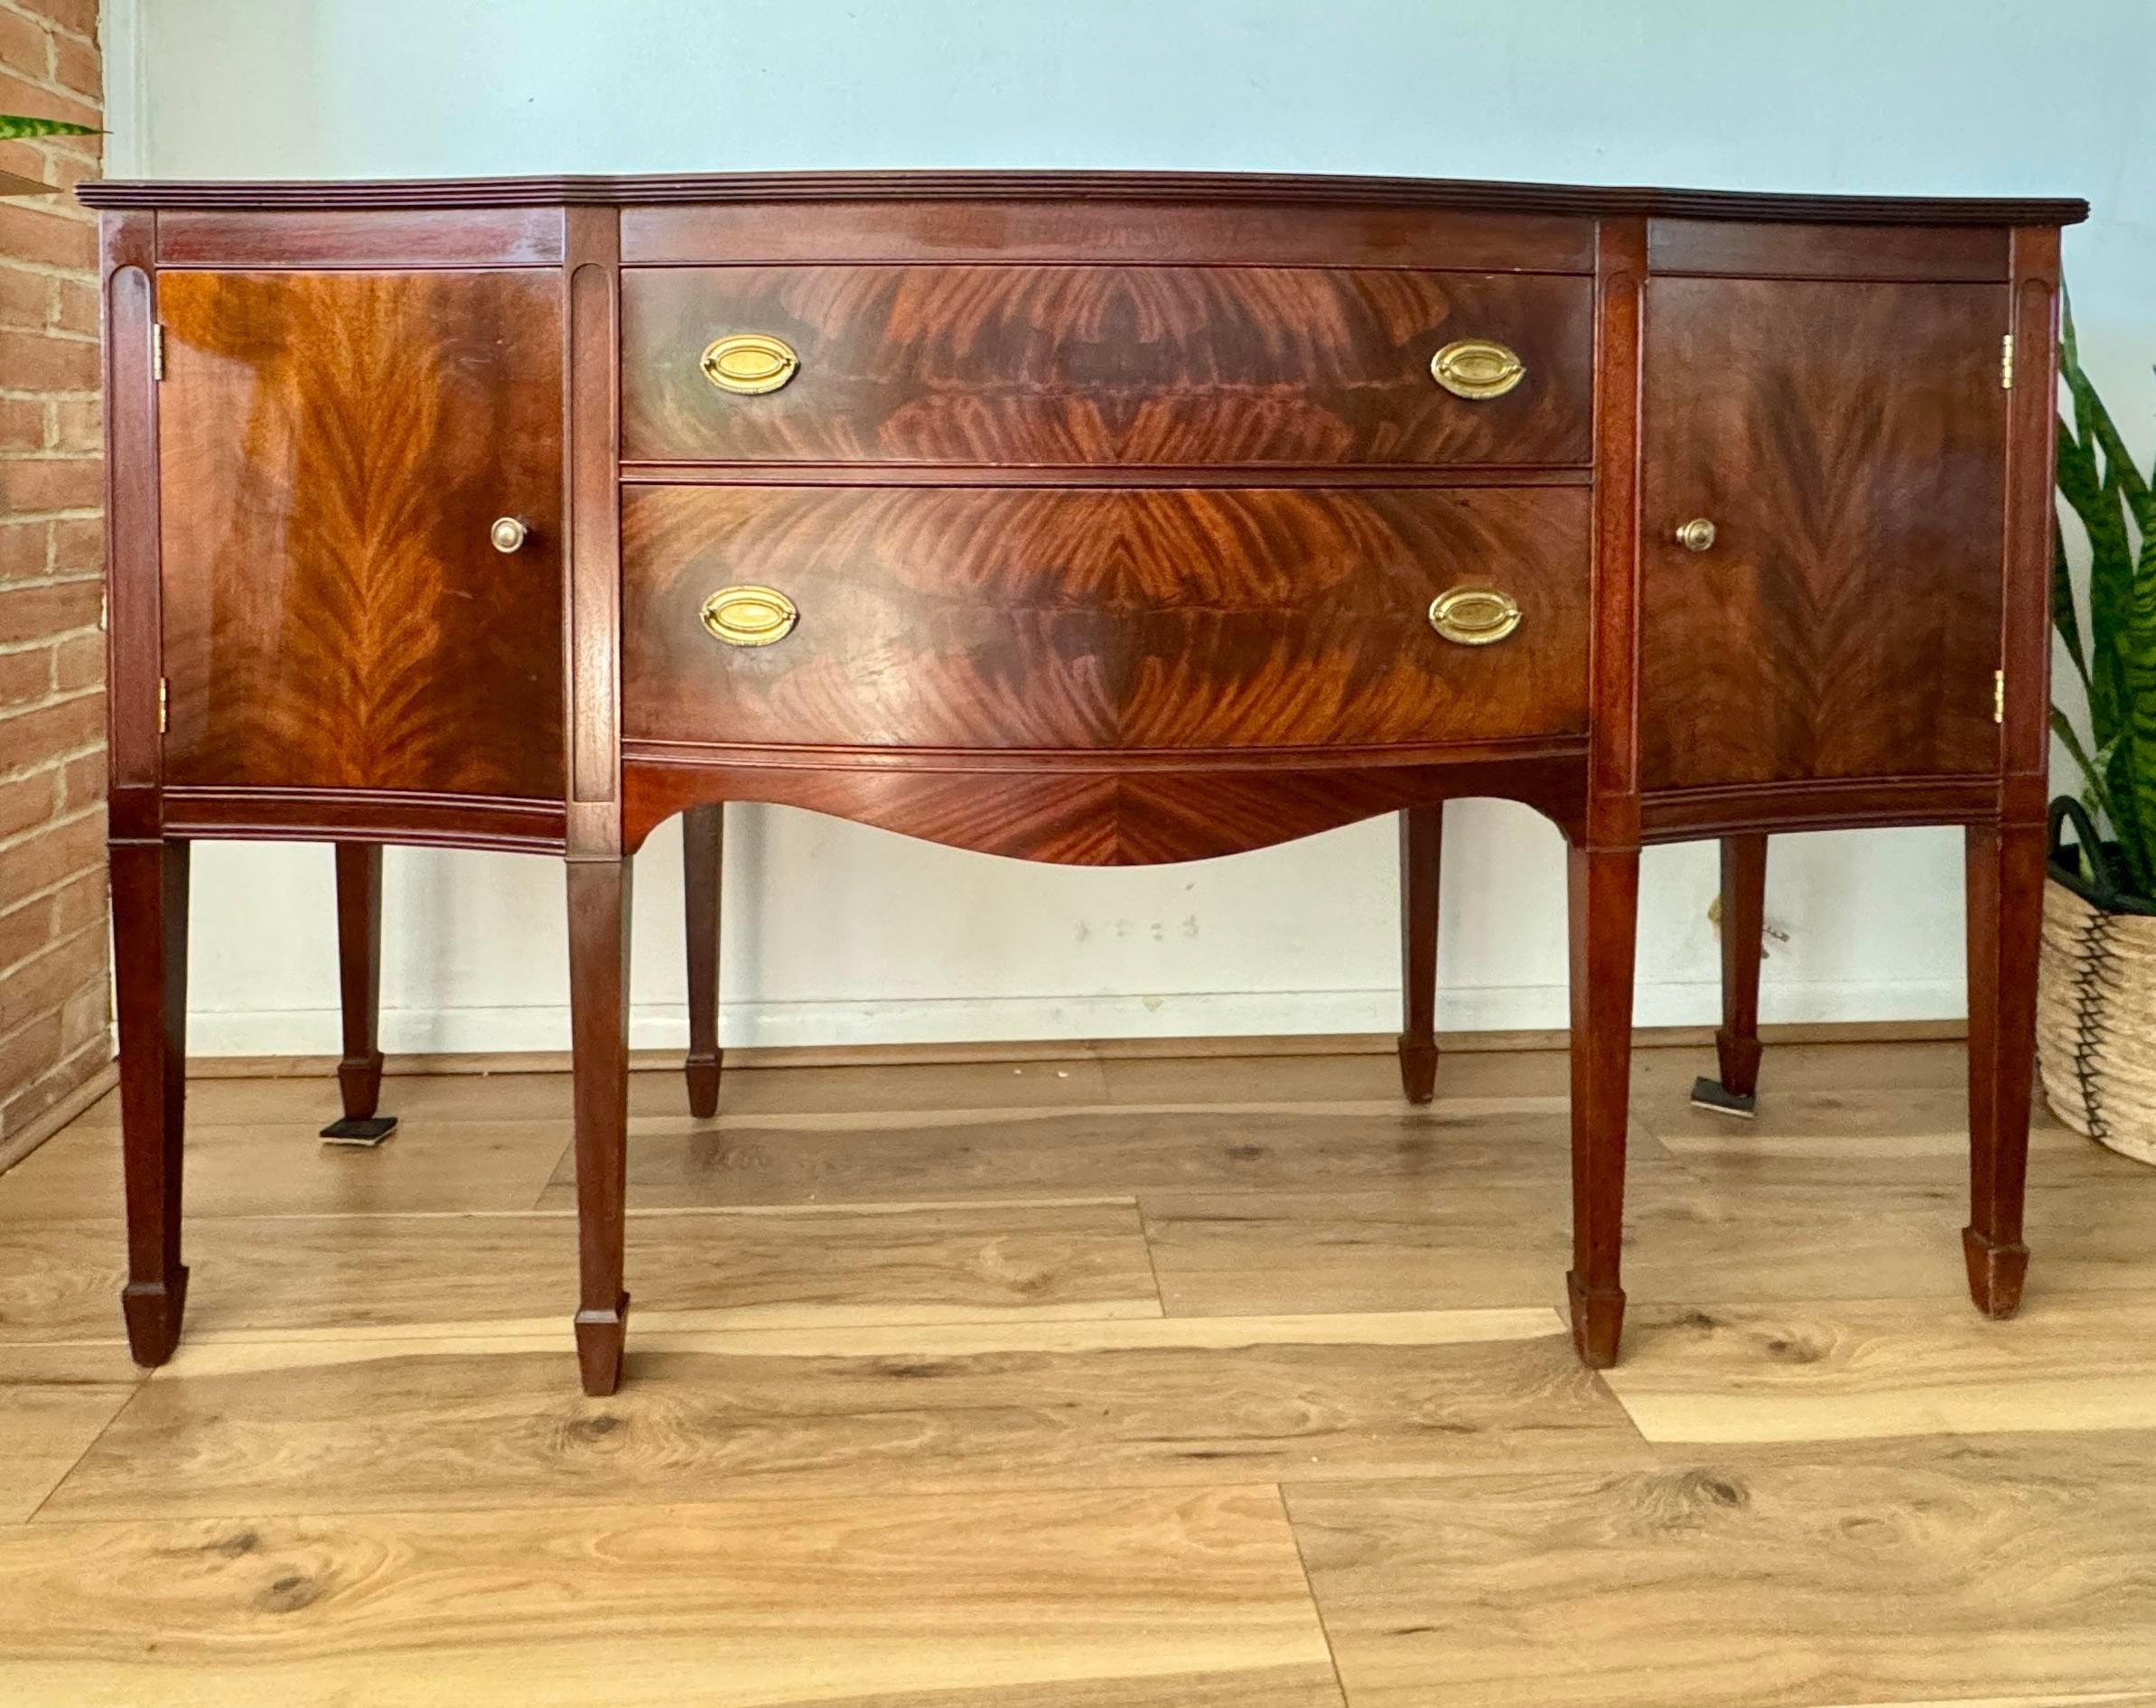 Sheraton-style mahogany sideboard server with spacious storage features. This elegant piece showcases two expansive drawers and two large cabinets, providing ample storage space.